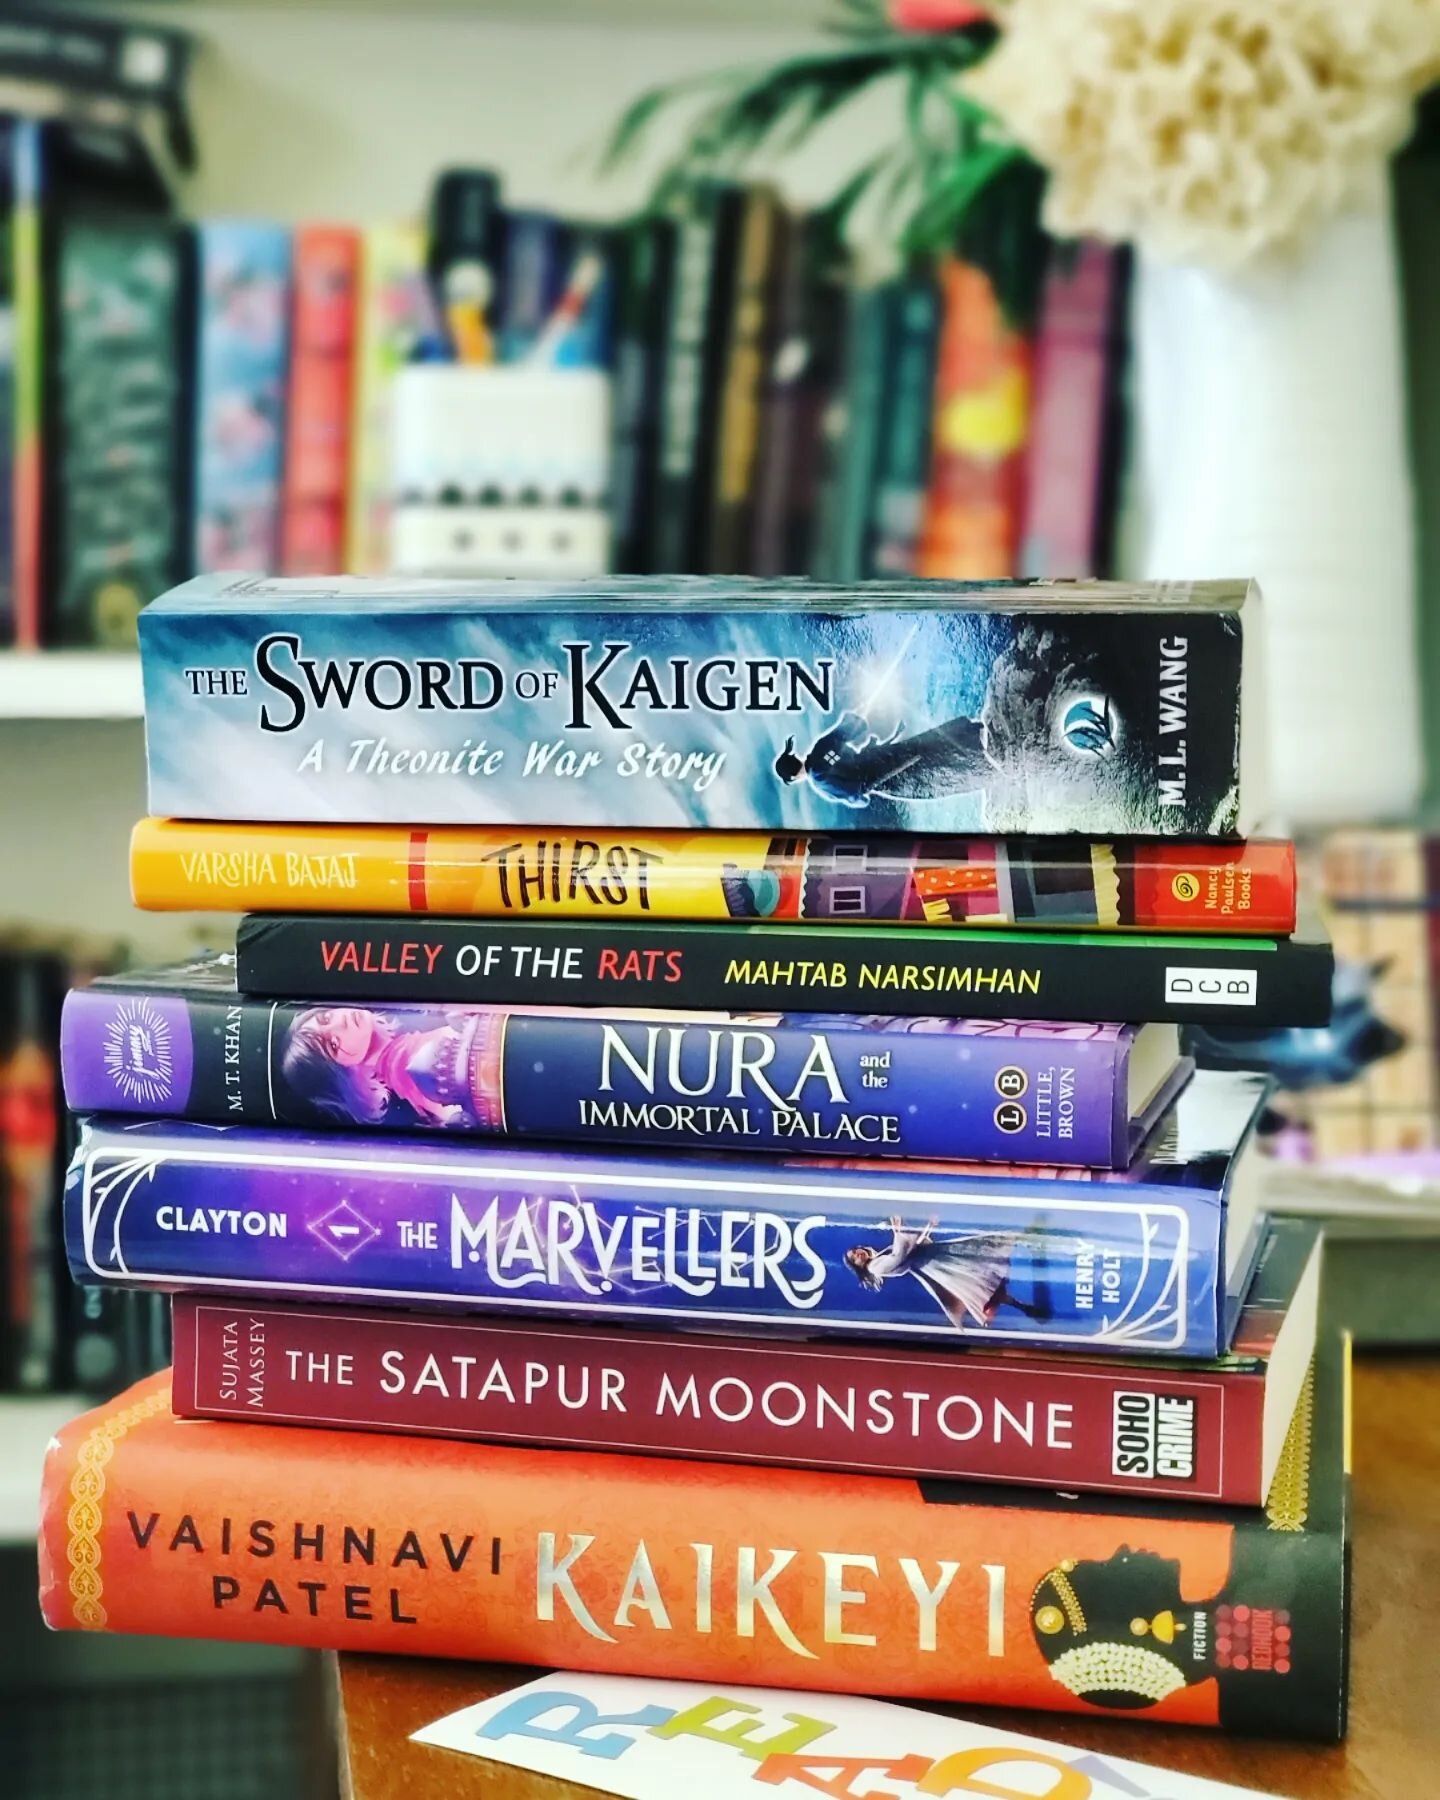 Do I have enough hours in the day to finish all the things on my to do list? Not even close. But these books have got me so excited to shun away my tasks and get reading. 🤓📚

Knowing my reading pace, these will keep me company until the end of the 